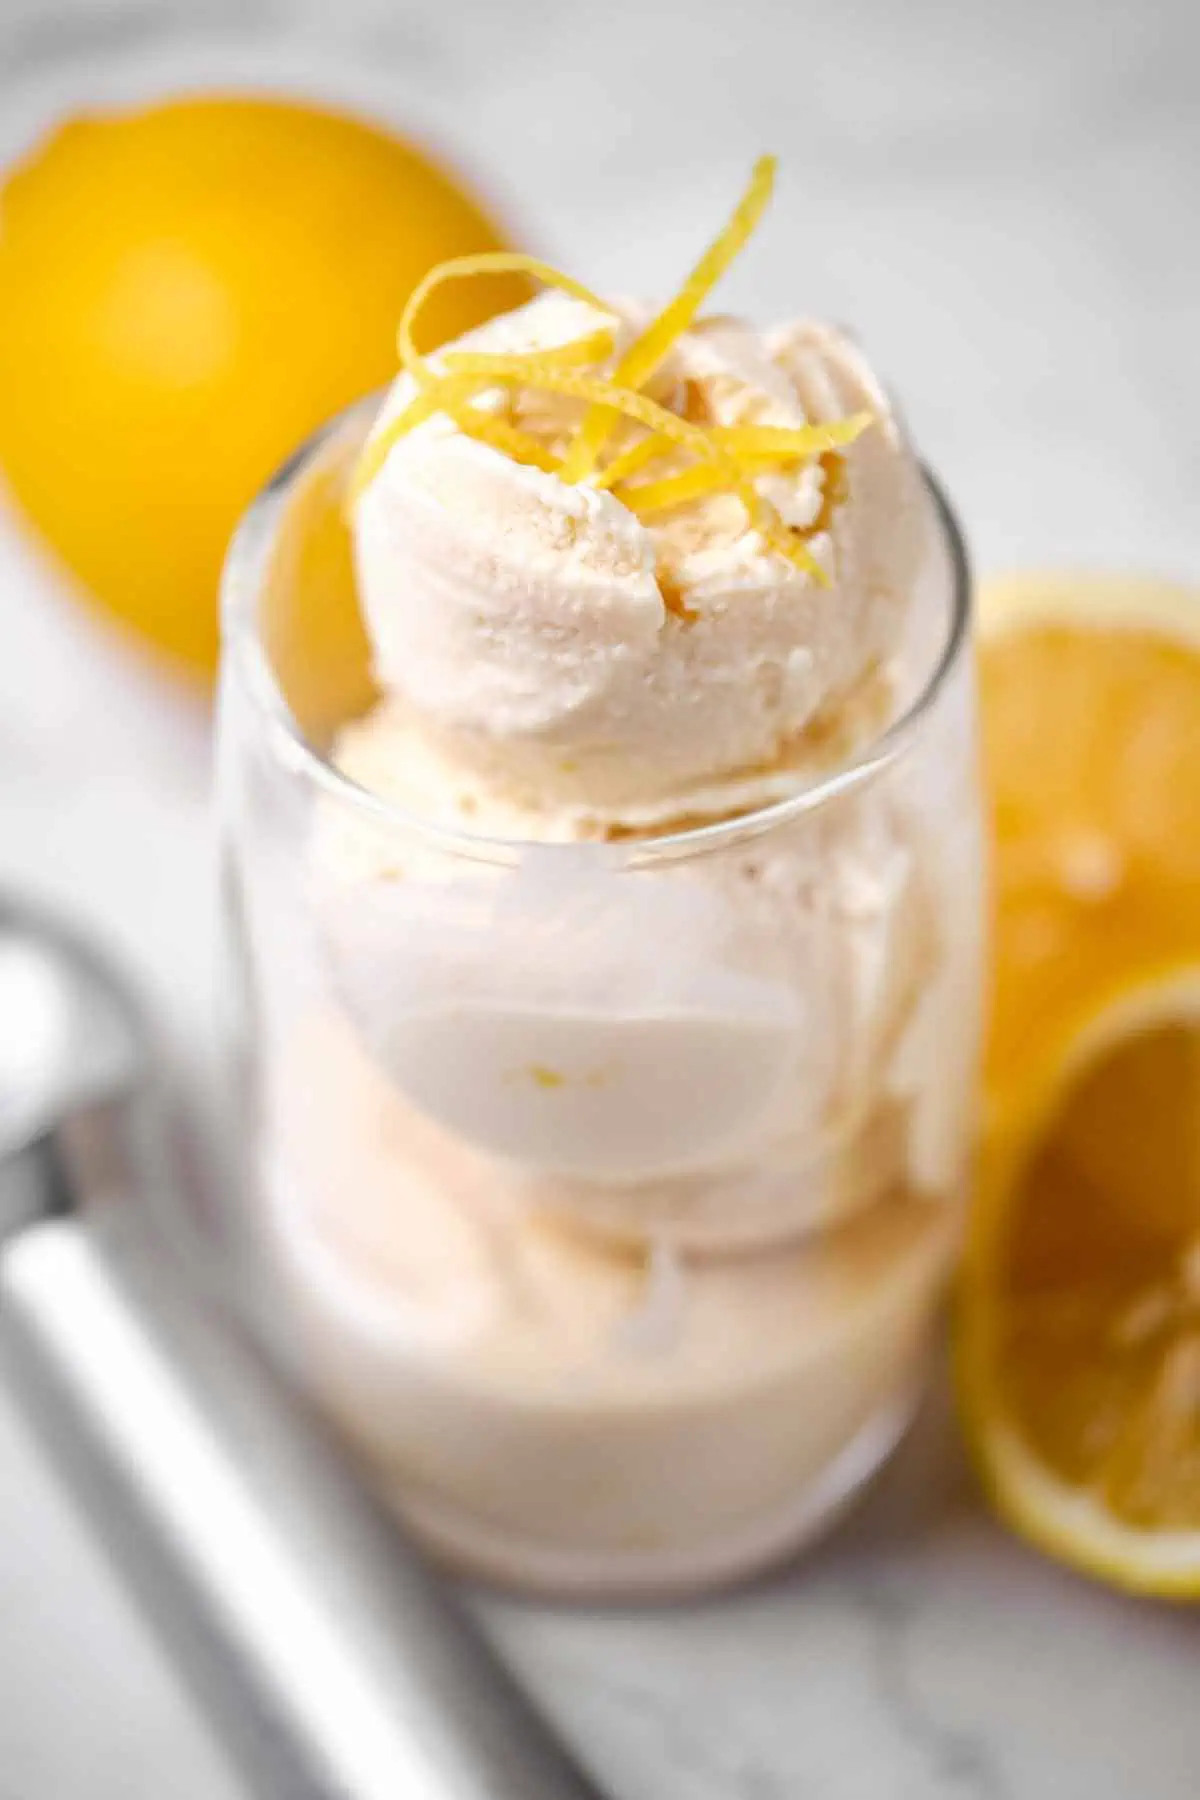 A clear glass filled with 3 scoops of lemon ice cream with fresh lemons and zest to garnish.